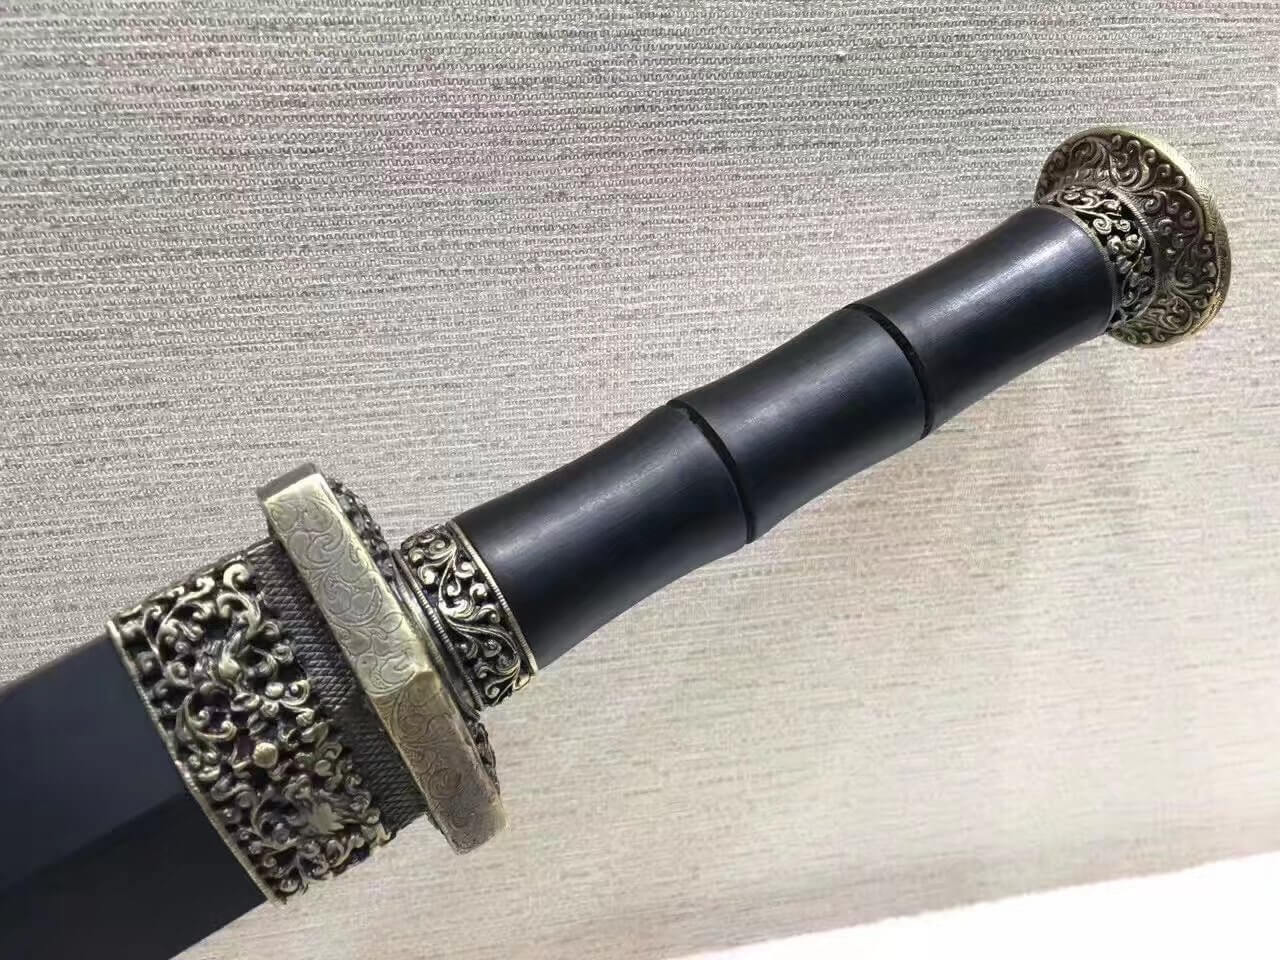 Longquan sword,High manganese steel etched blade,Black scabbard,Brass fittings - Chinese sword shop